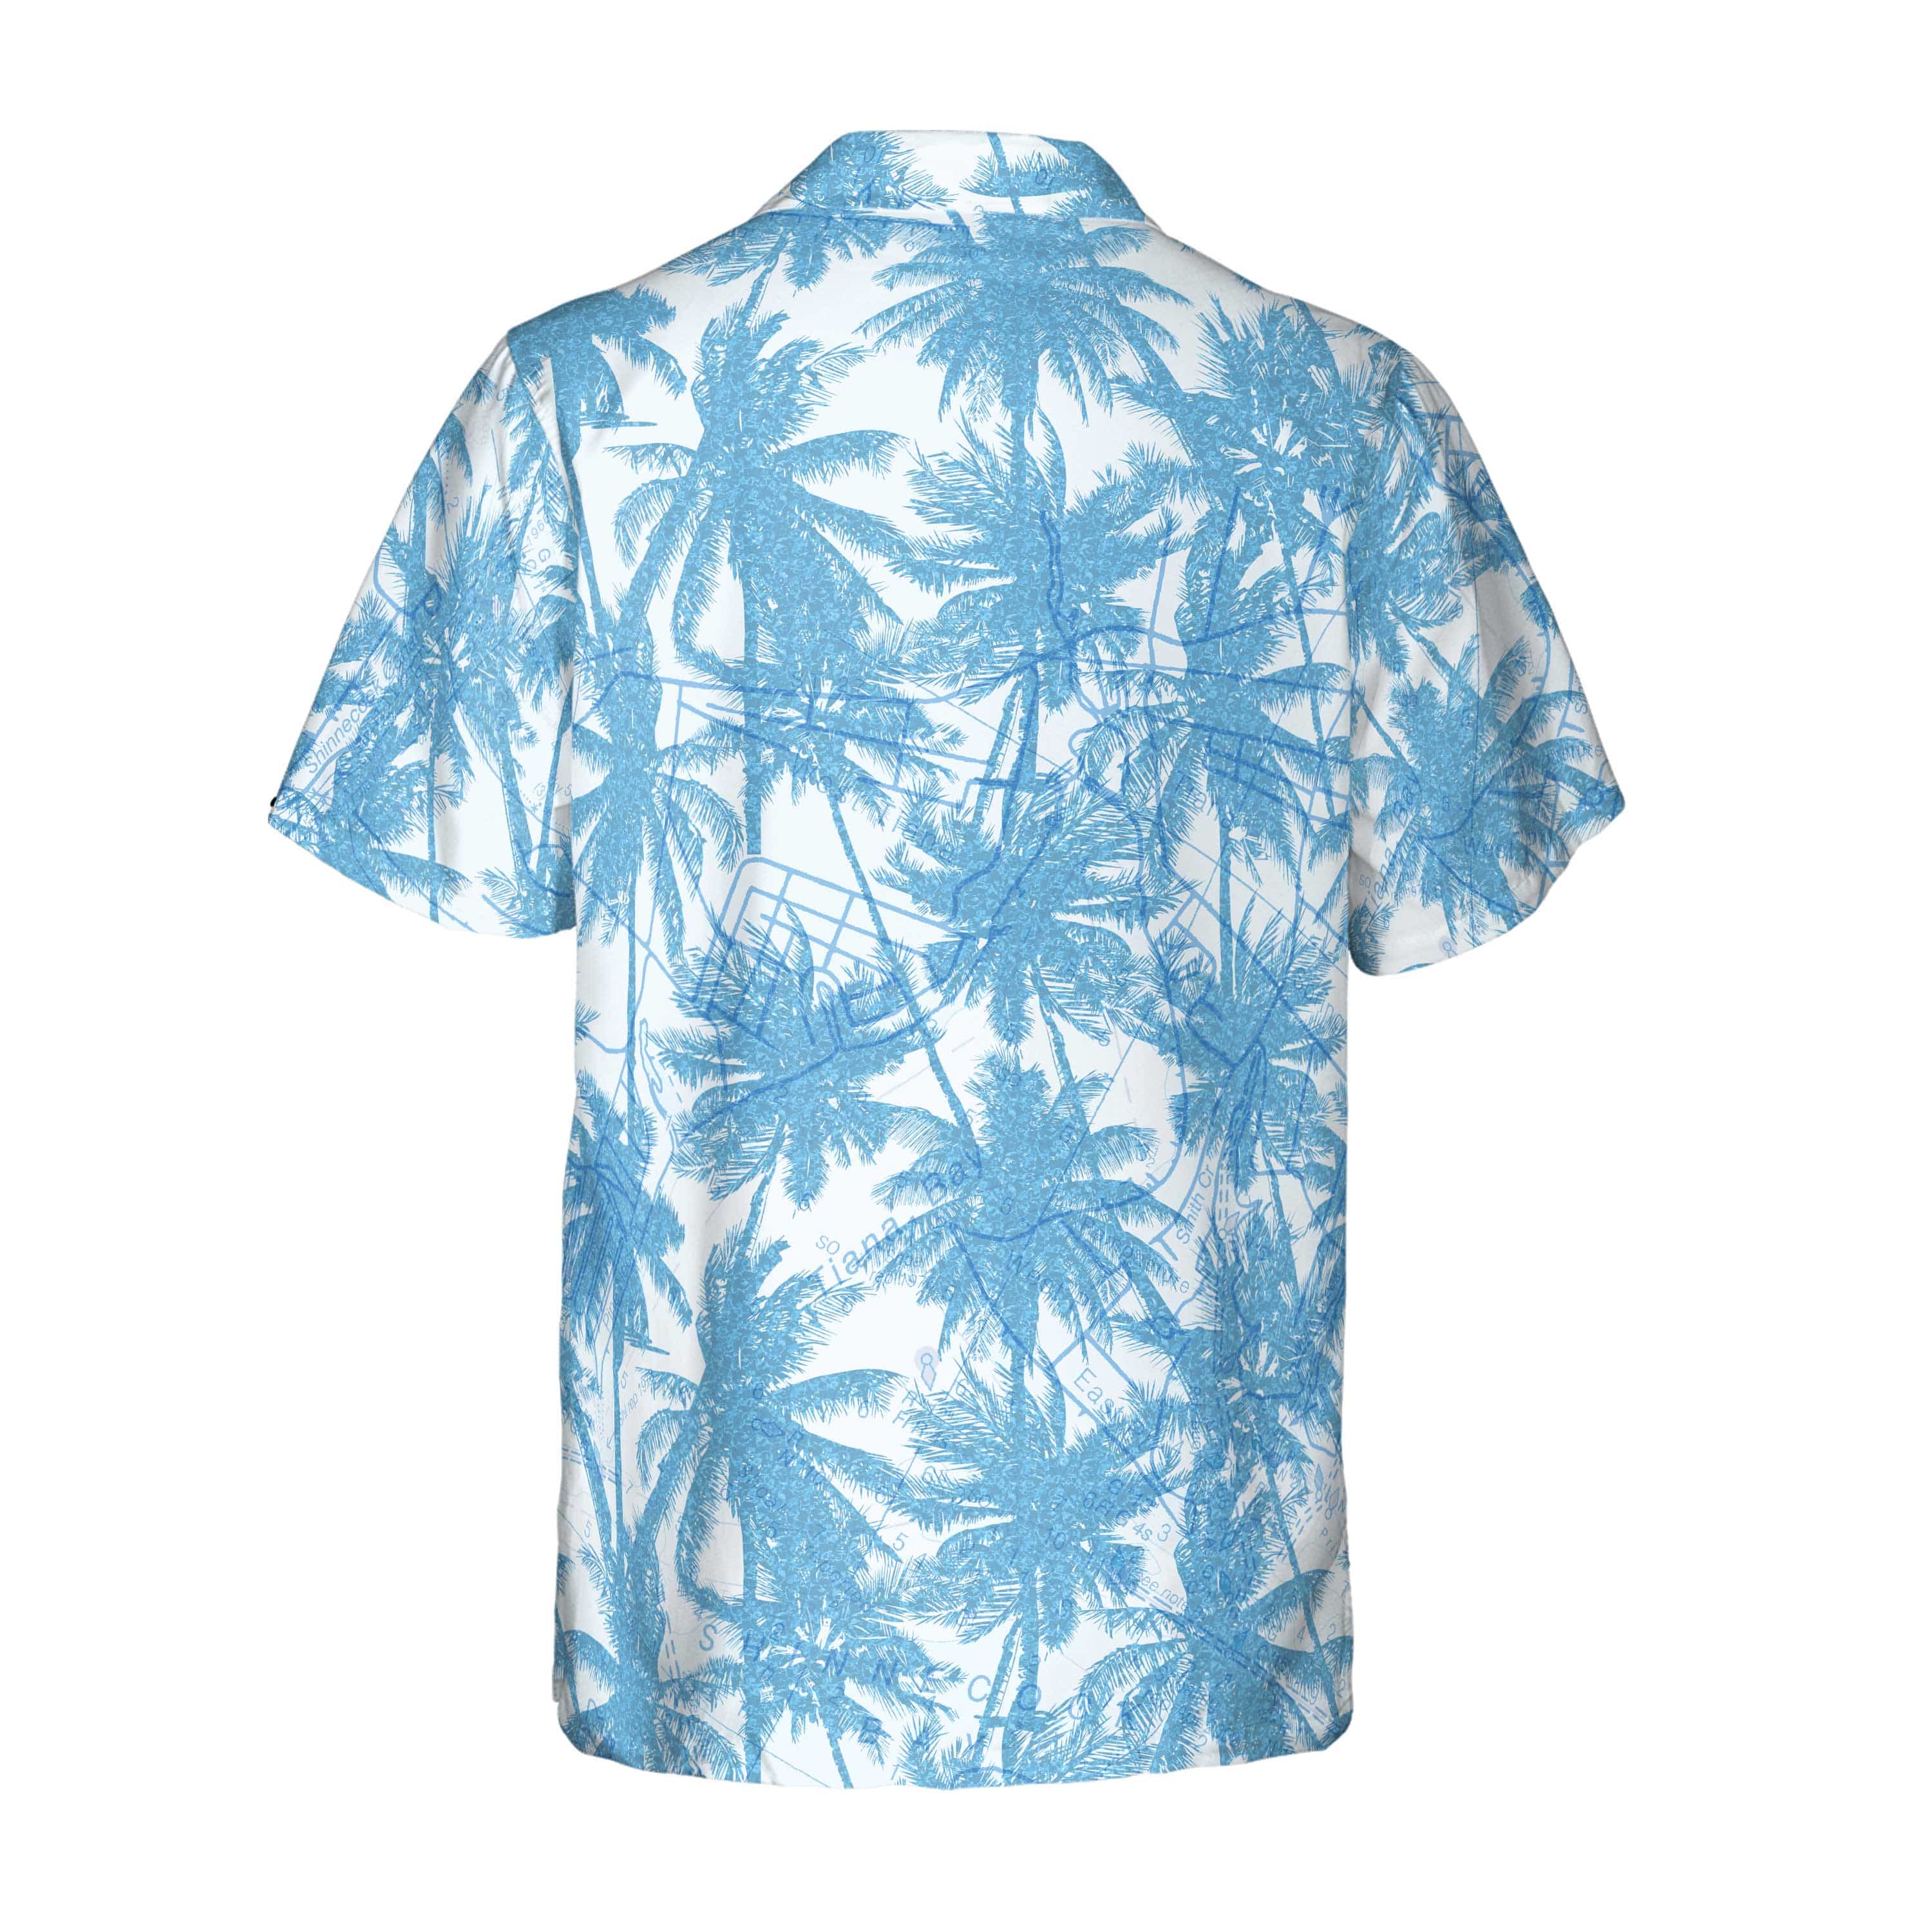 The Cool Blue Palms of Shinnecock Canal Shirt